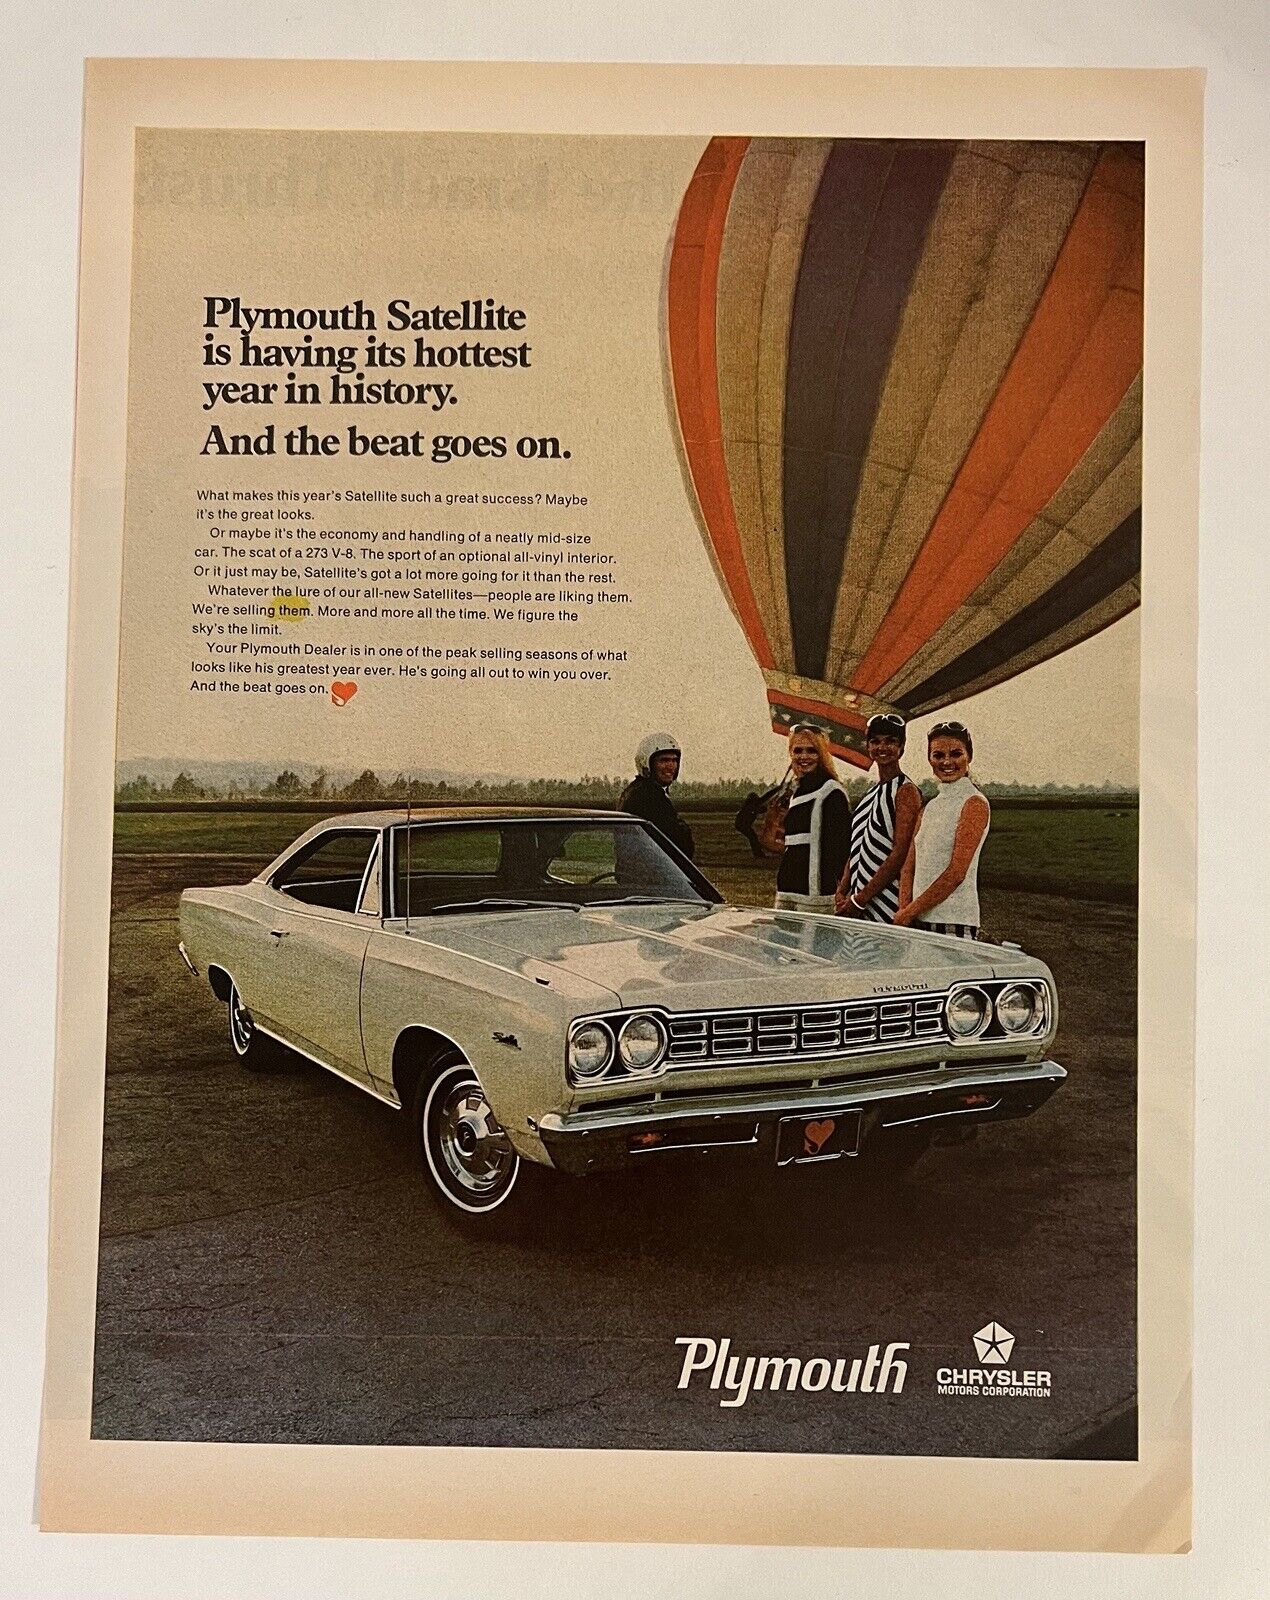 Plymouth Satellite 1968 Life Print Add “And The Beat Goes On”